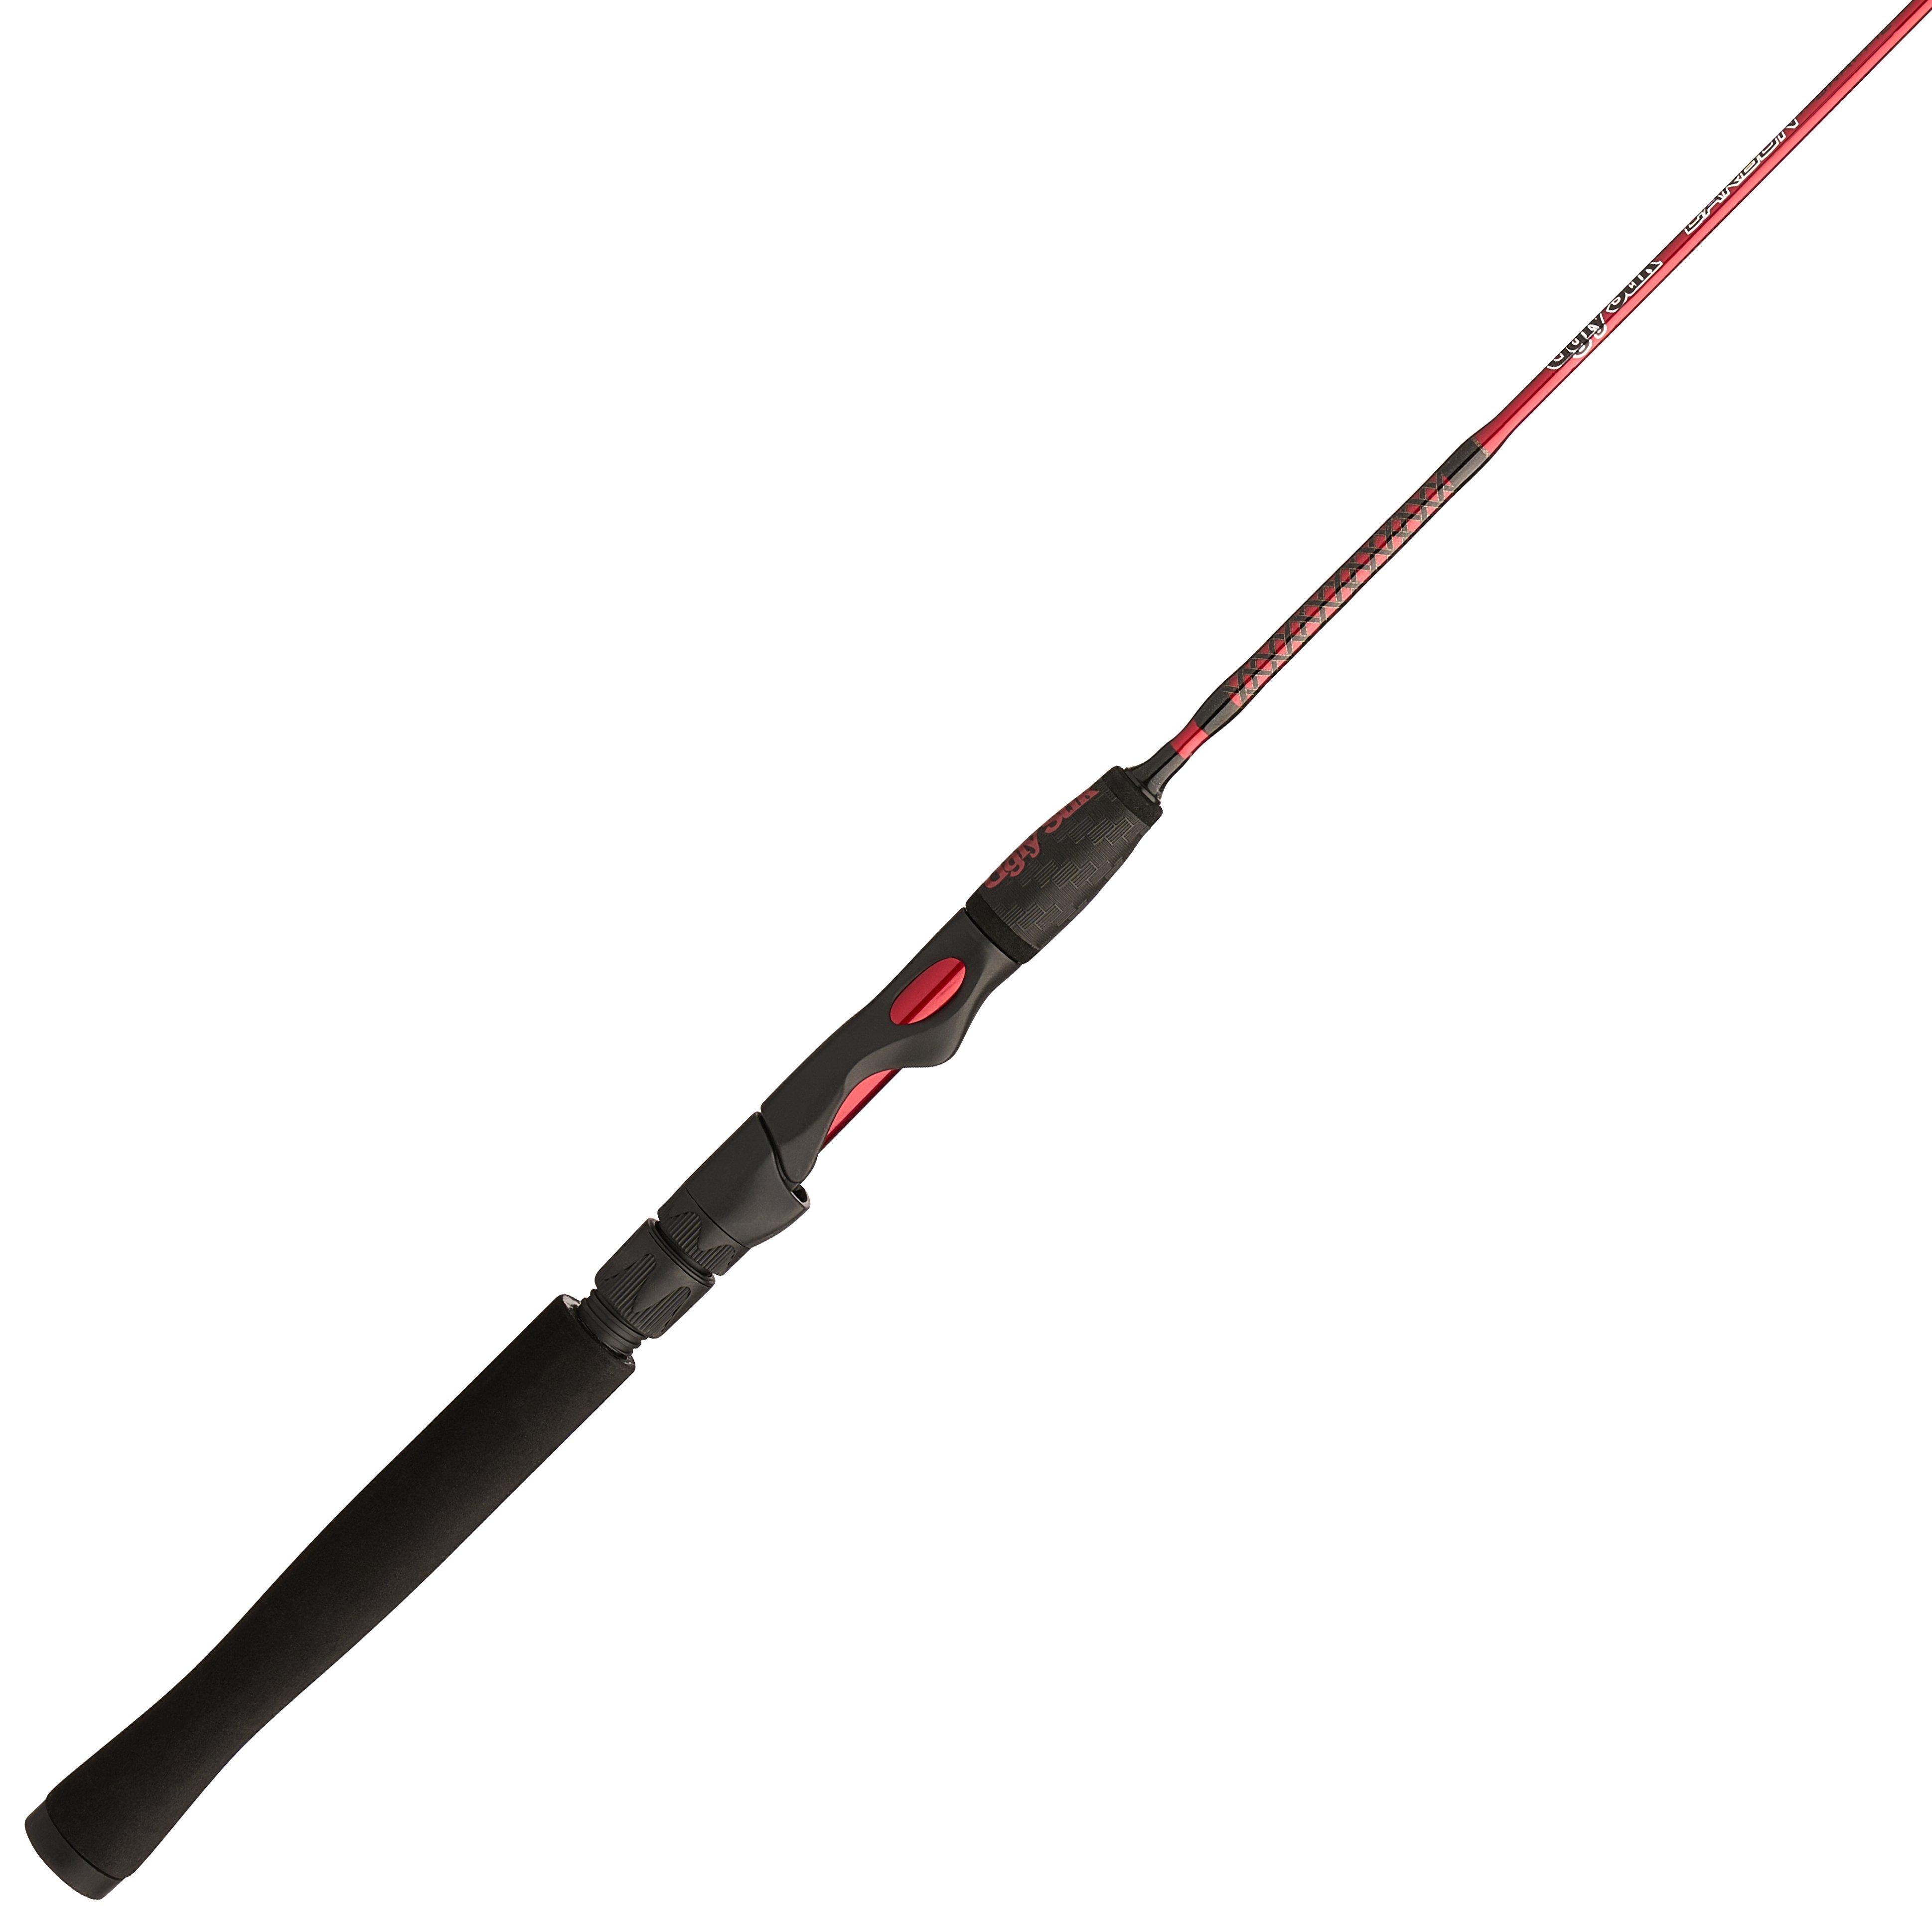 https://op1.0ps.us/original/opplanet-ugly-stik-carbon-crappie-spinning-rod-handle-type-a-5ft-4in-rod-length-ultra-light-power-moderate-fast-action-1-piece-uscbcrsp541ul-main